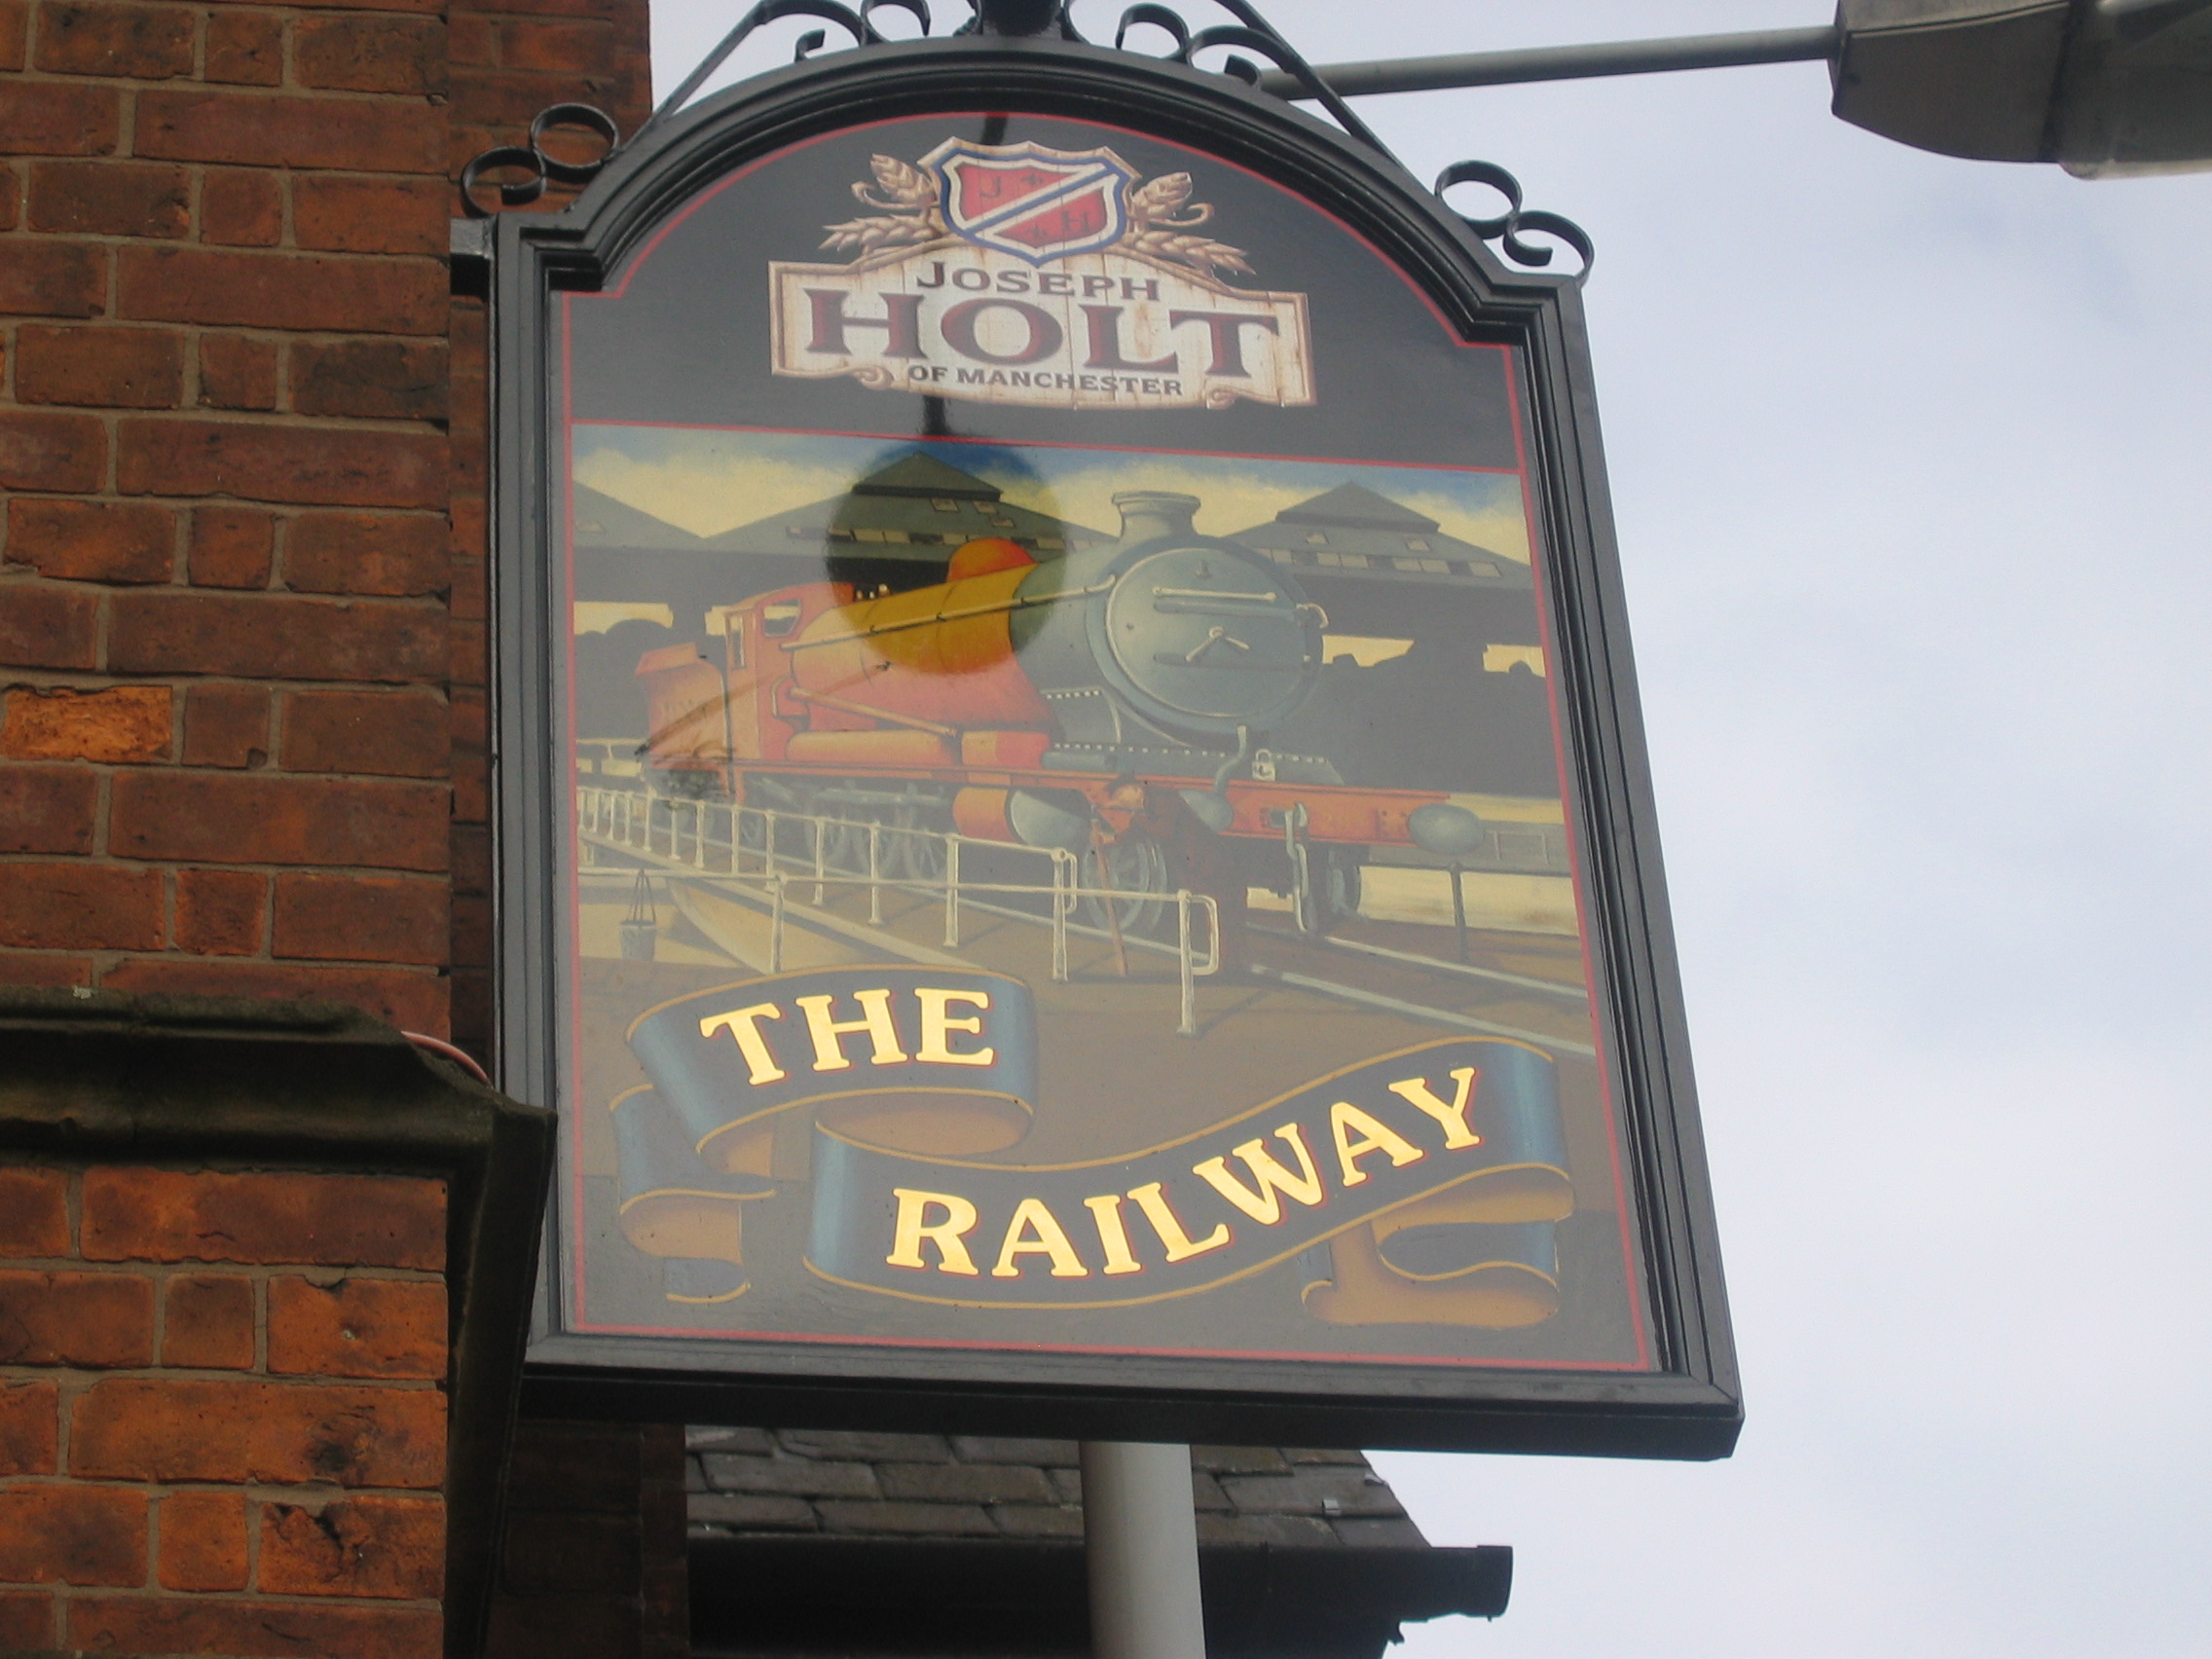 Photo taken by me – pub sign for The Railway Hotel, Newton Heath  – Manchester